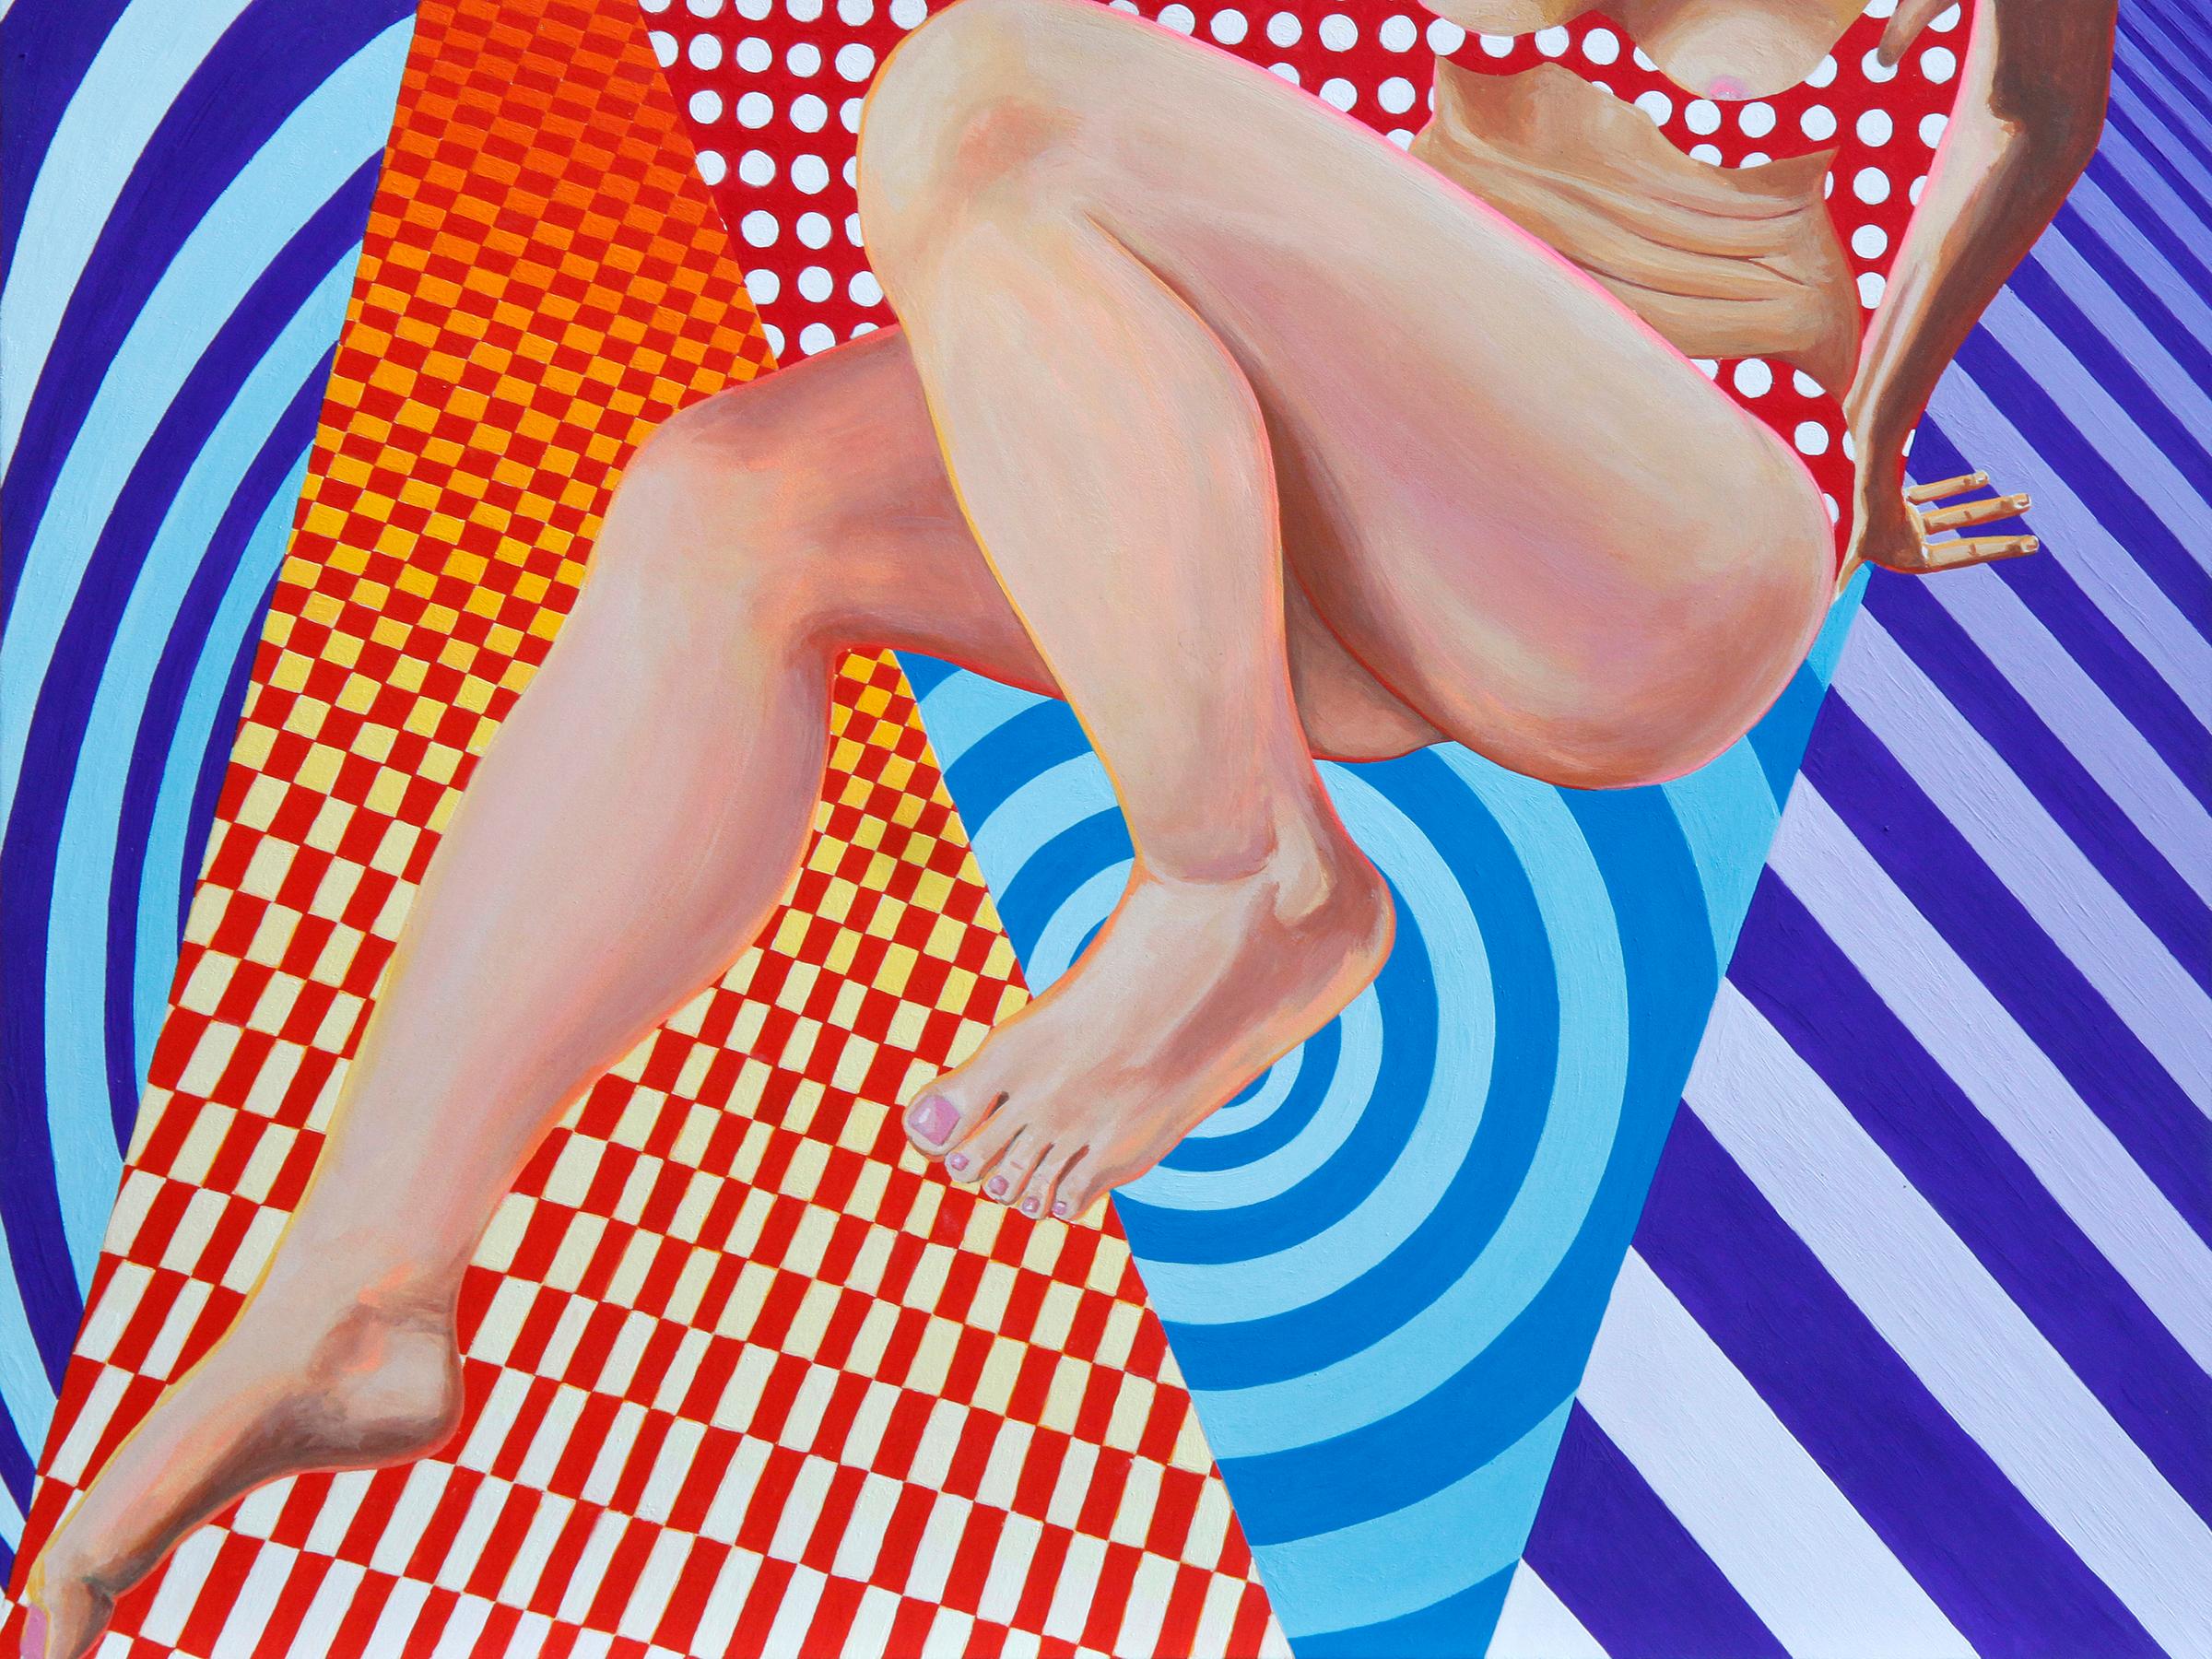 "Toe Tap" Optical Art Contemporary Painting with Female Figure